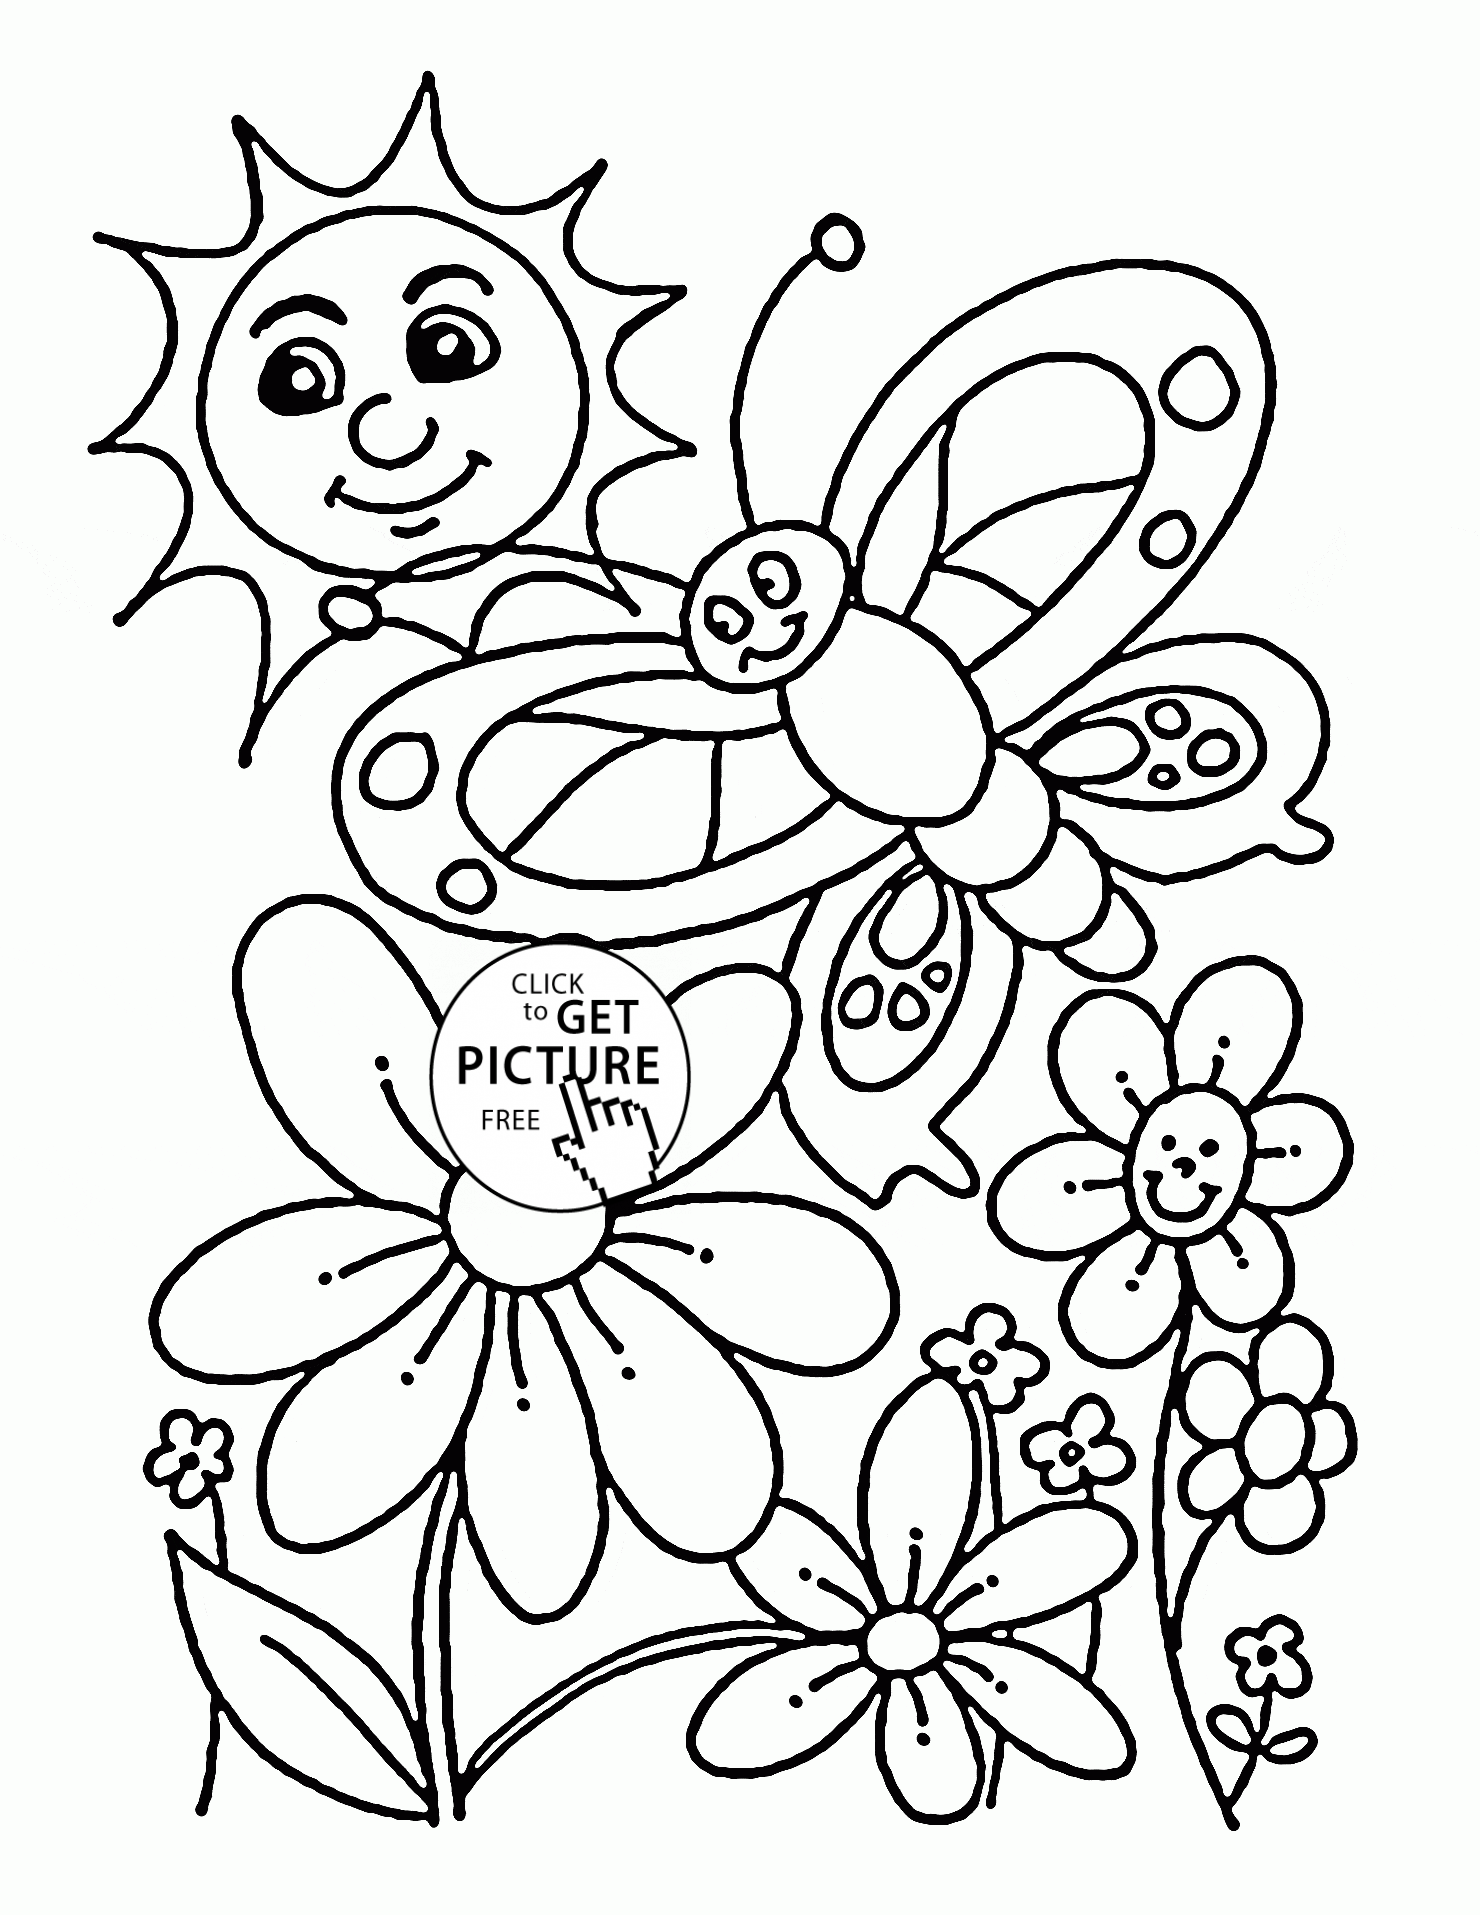 153 Simple Nature Coloring Pages Free for Adult